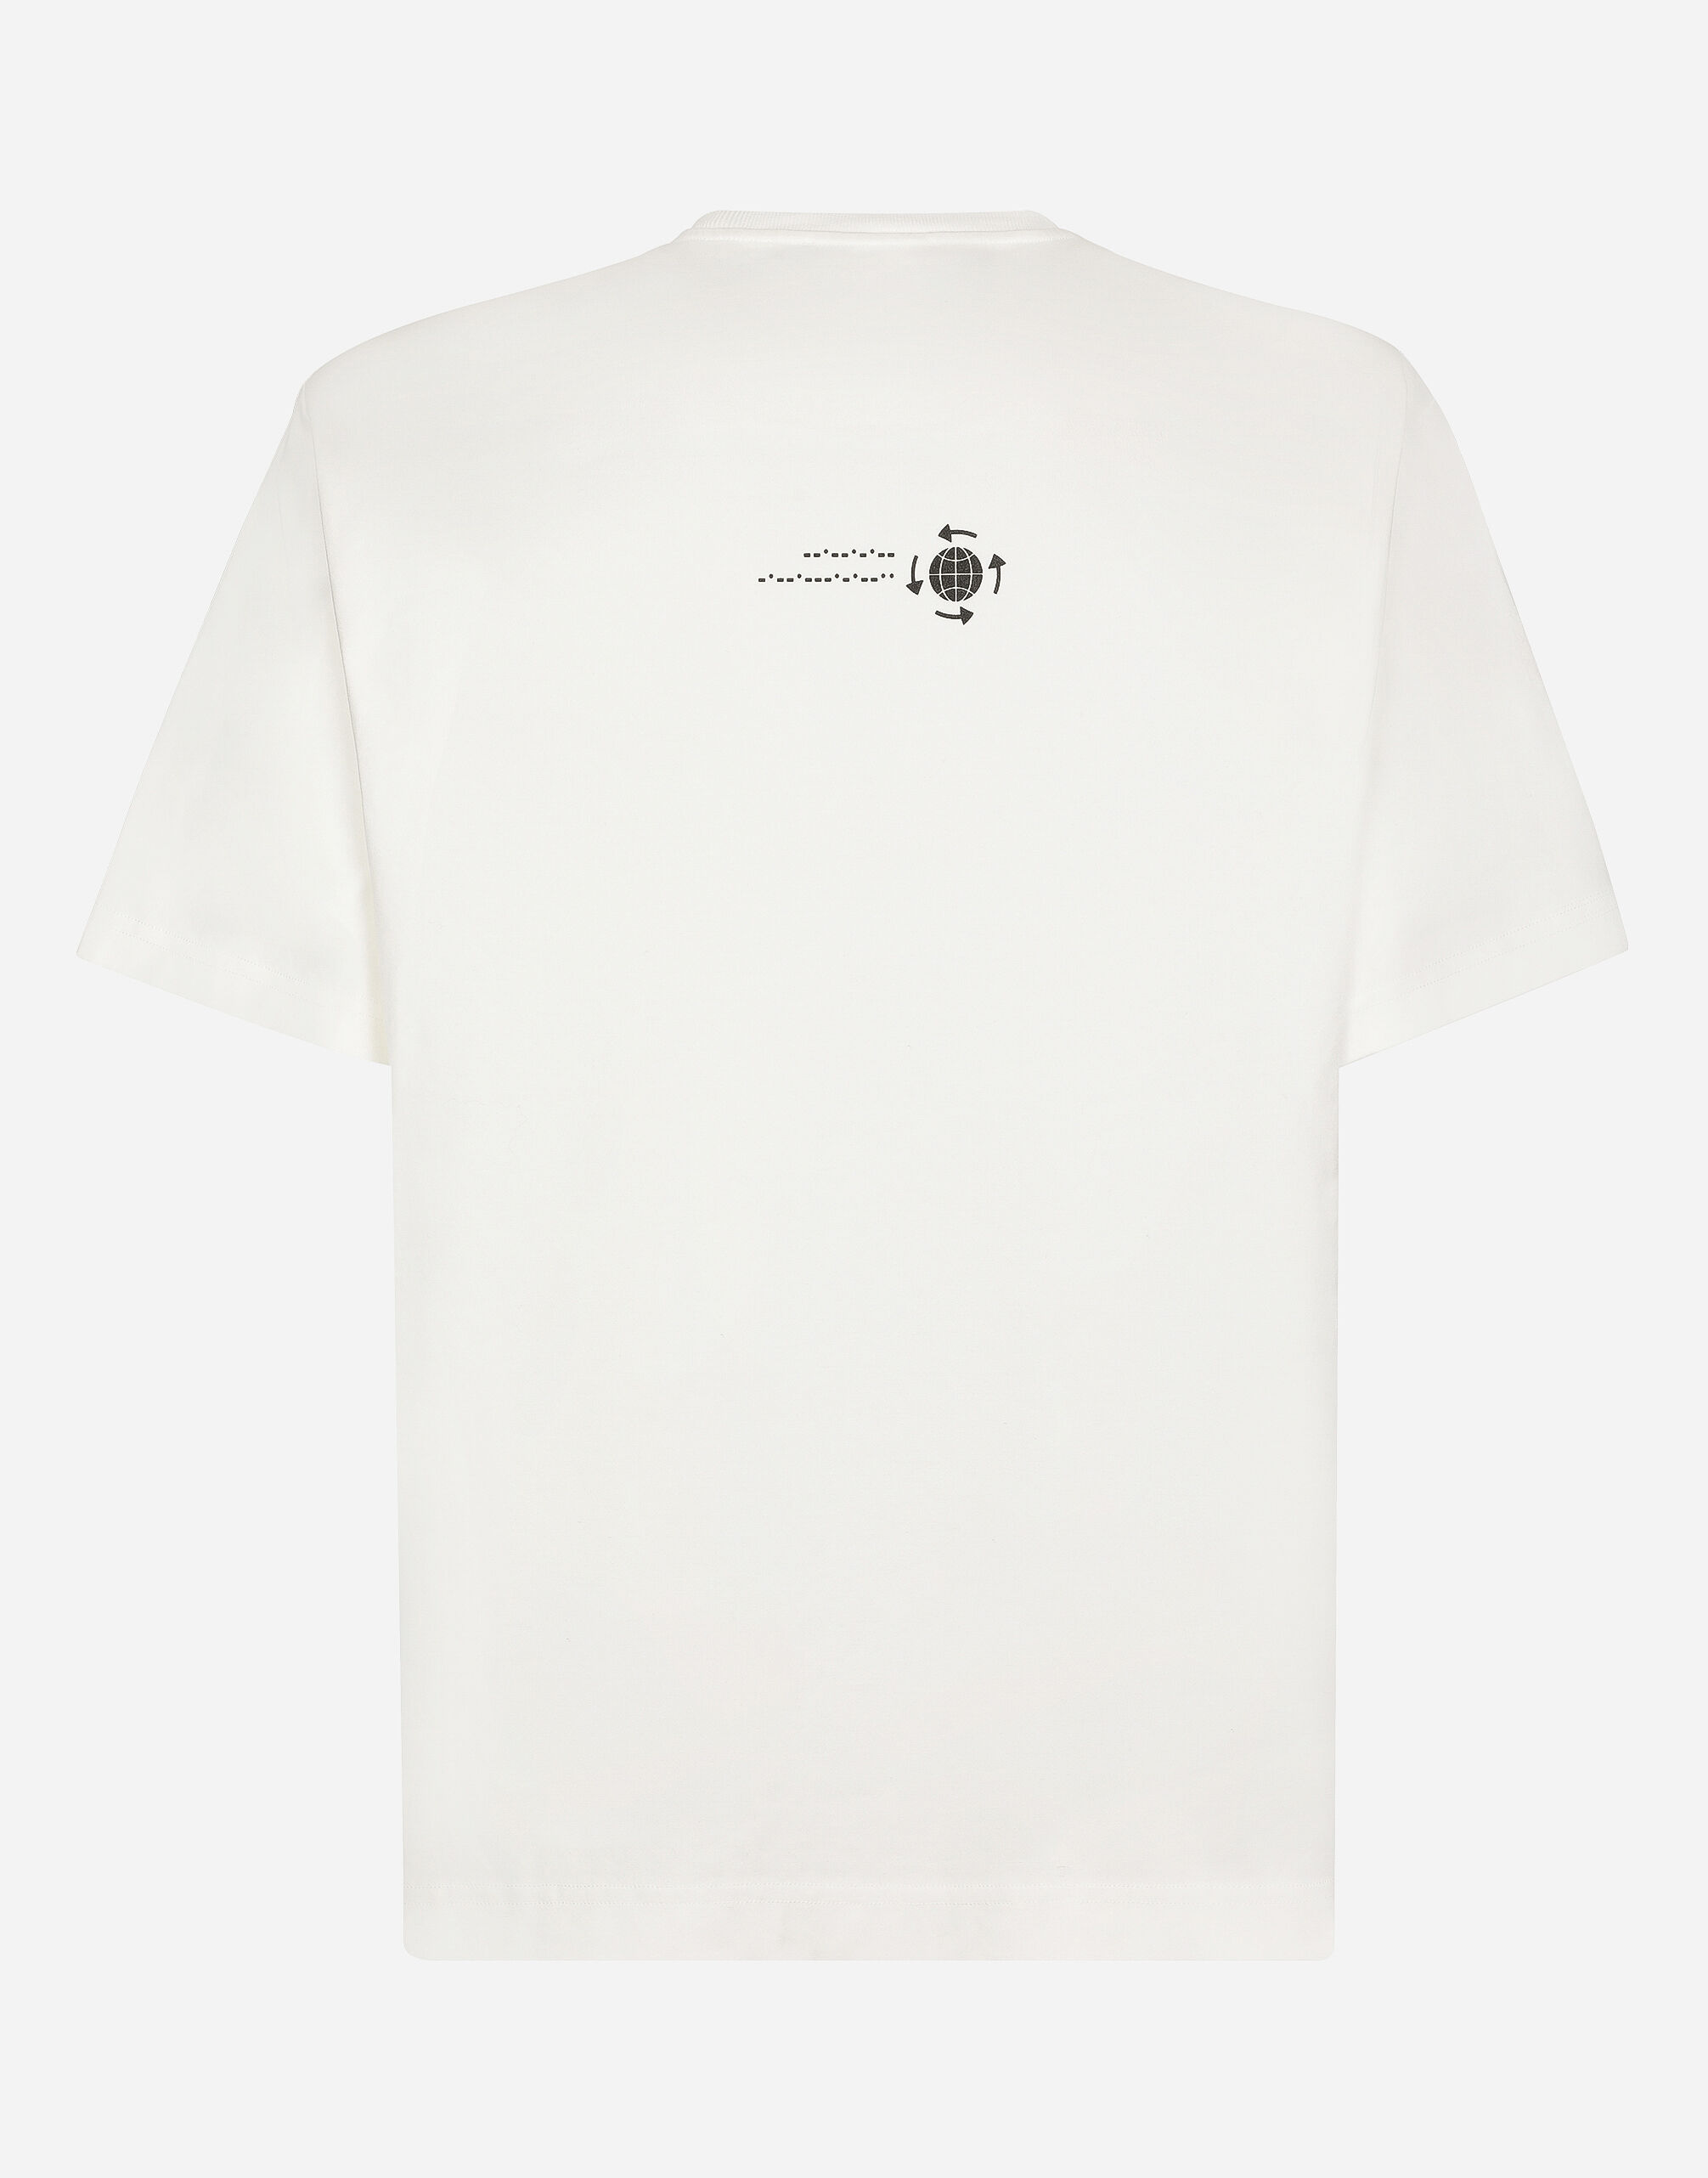 BackPはらぺこ商店　Back Print T-shirts White